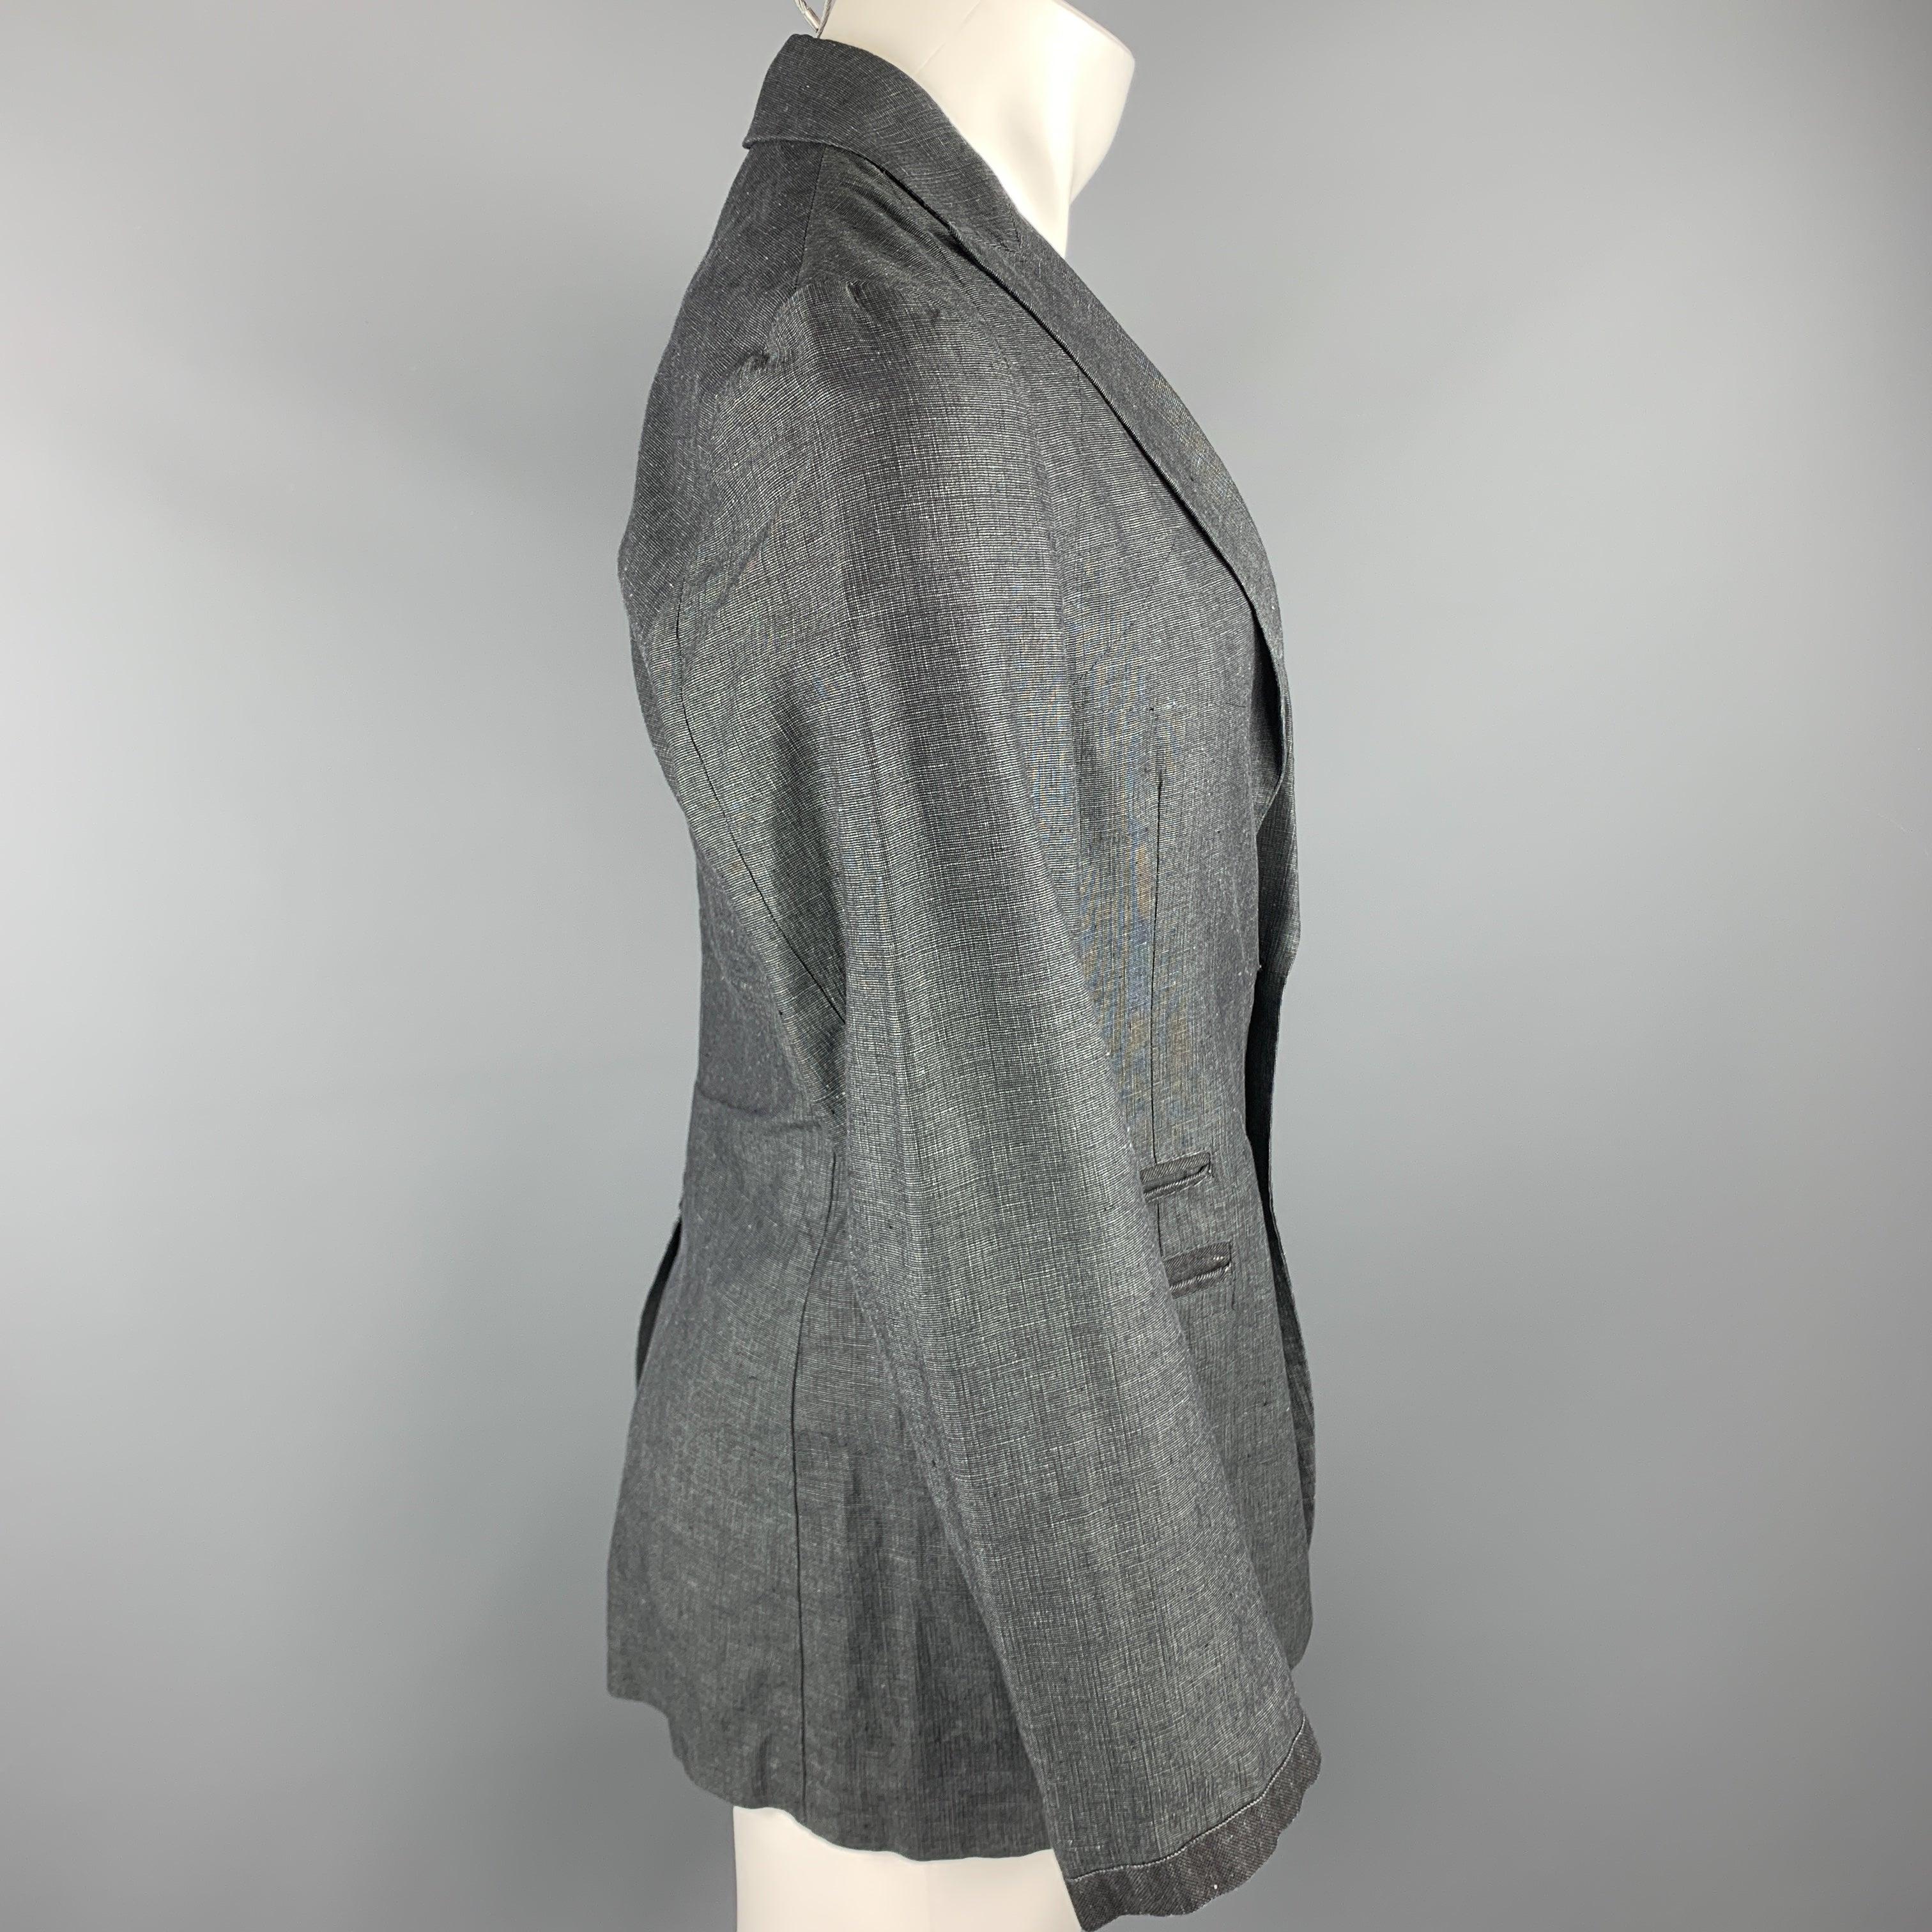 JOHN VARVATOS sport coat comes in a dark gray heather linen / cotton featuring a peak lapel style, stitching details, slit pockets, and and a two button closure. Made in Italy.Excellent
Pre-Owned Condition. 

Marked:   IT 46 

Measurements: 
